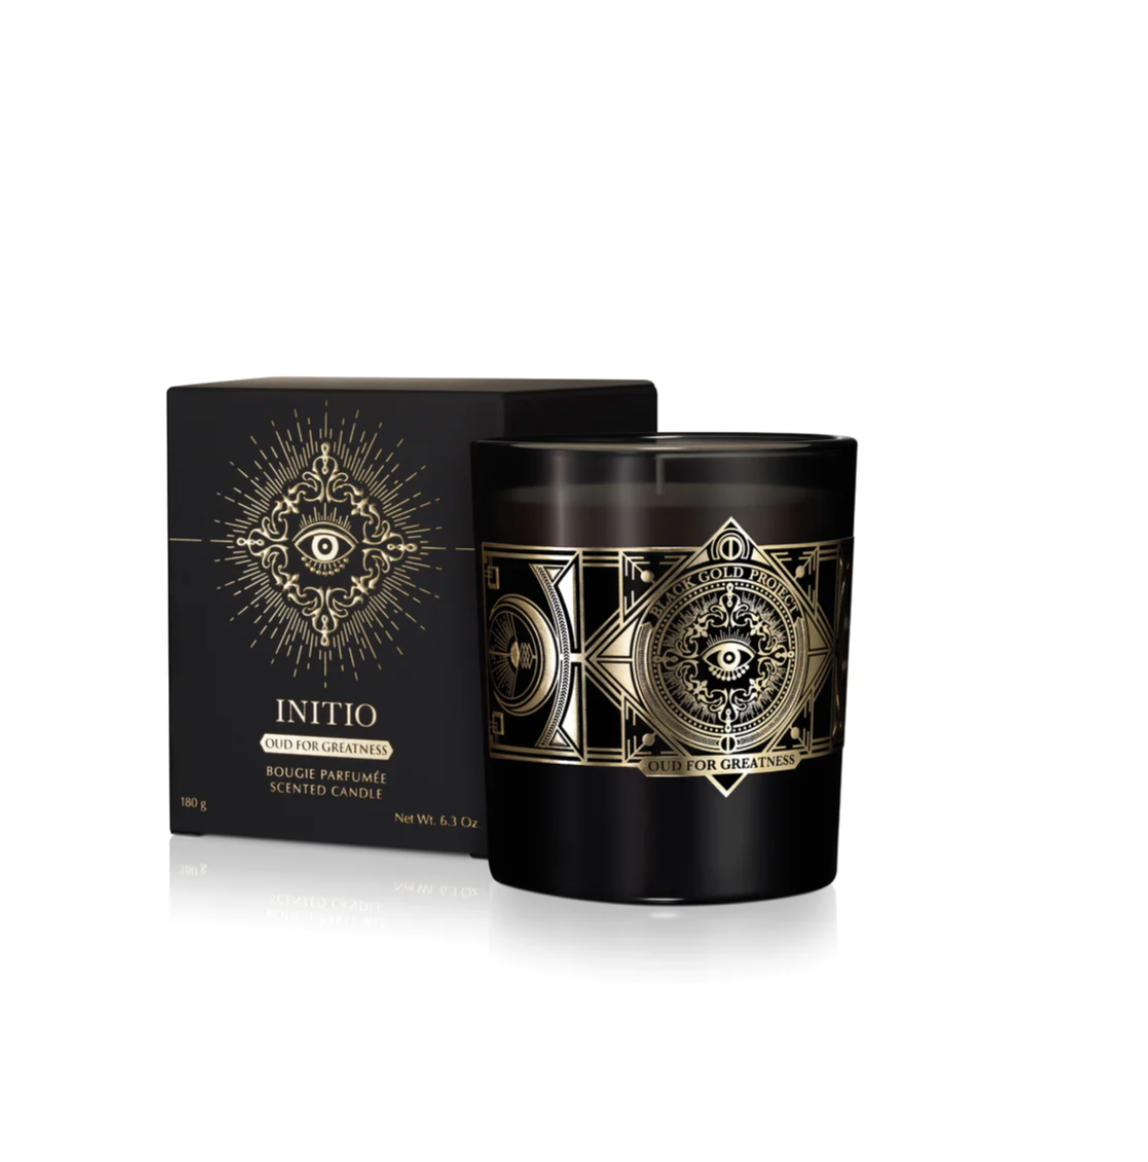 INITIO - OUD FOR GREATNESS CANDELA